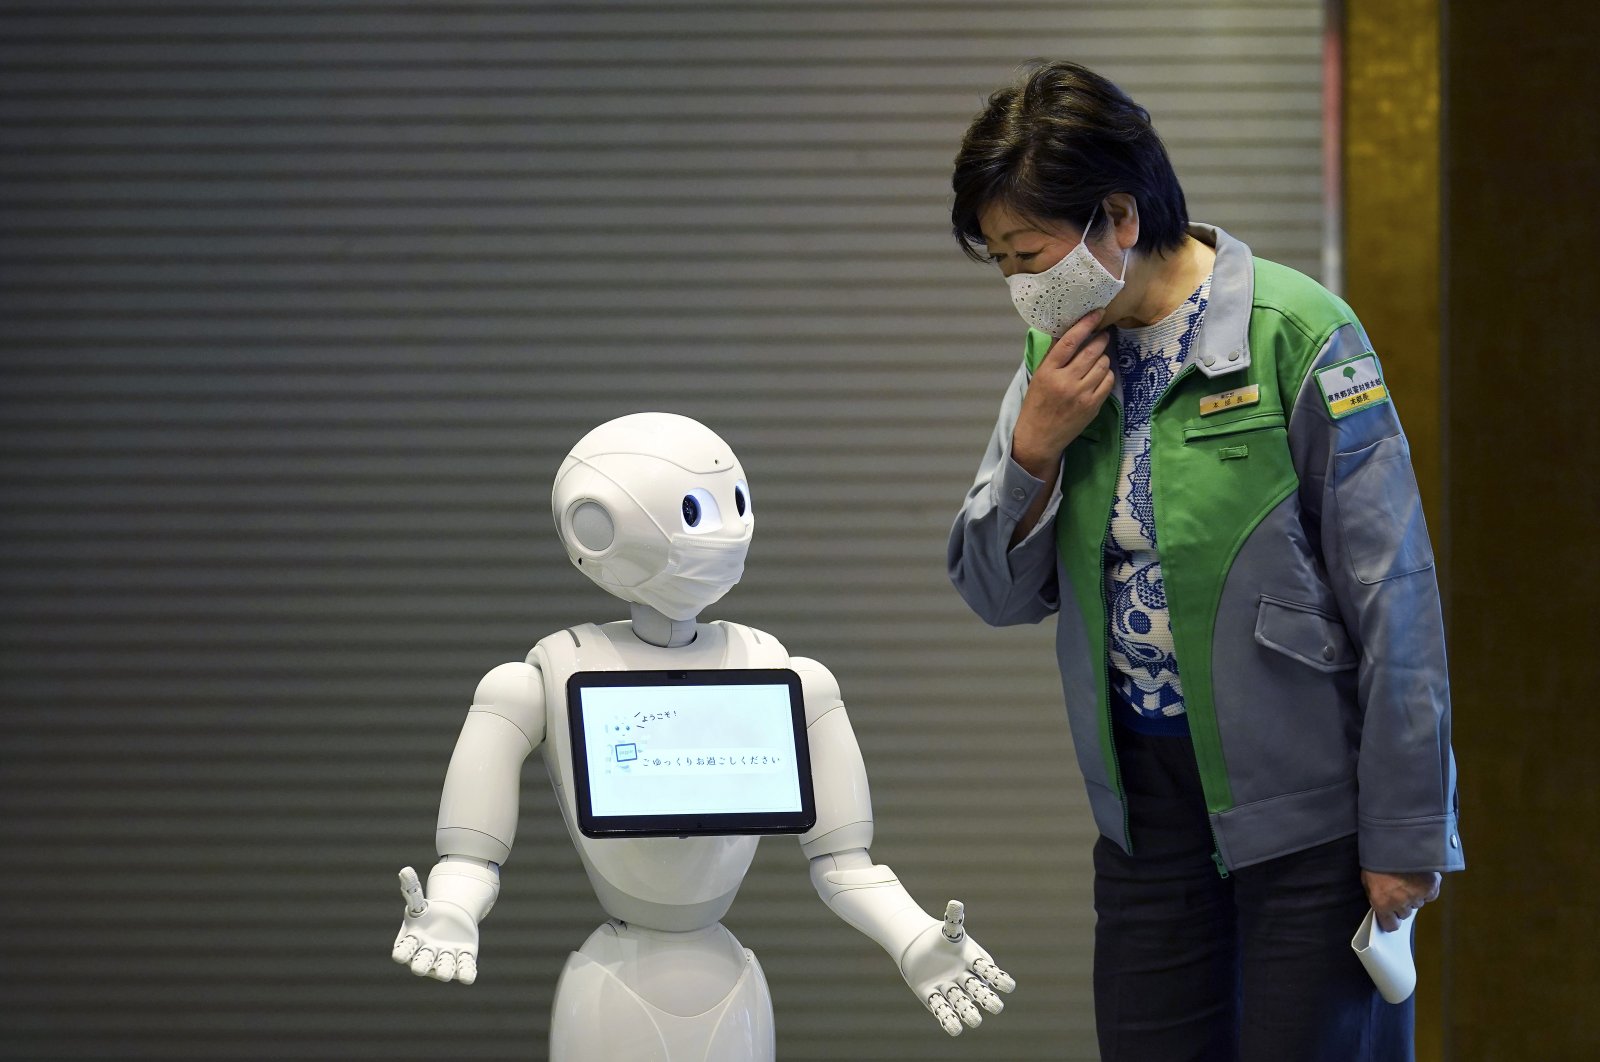 A humanoid robot Pepper wearing a face mask greets Tokyo Gov. Yuriko Koike at the lobby of a hotel for COVID-19 patients with mild symptoms during a media preview in Tokyo, Japan, Friday, May 1, 2020. (AP Photo)